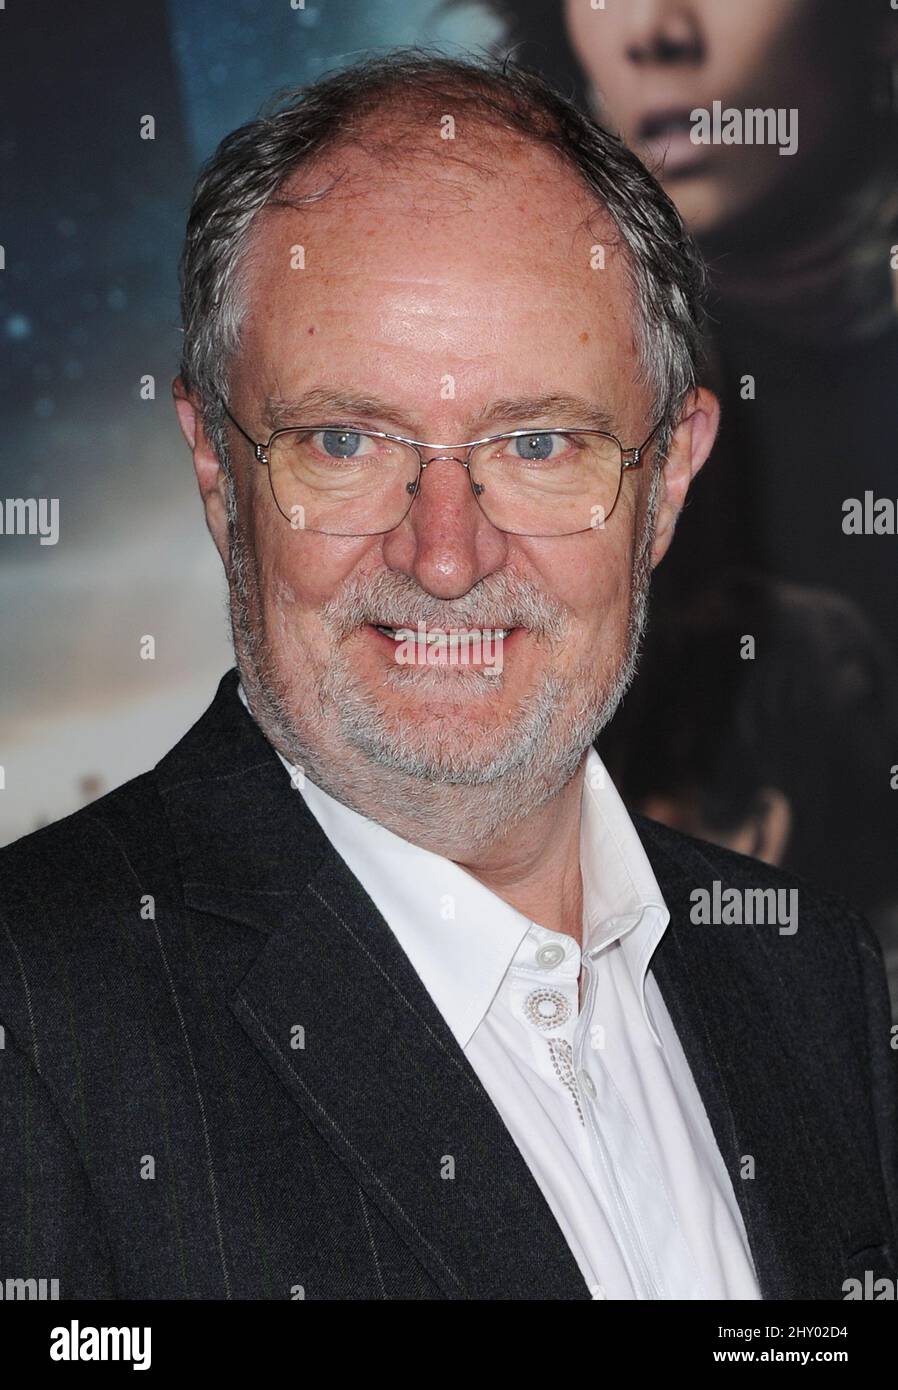 Jim Broadbent attending the 'Cloud Atlas' premiere held at Grauman's Chinese Theatre in Los Angeles, USA. Stock Photo